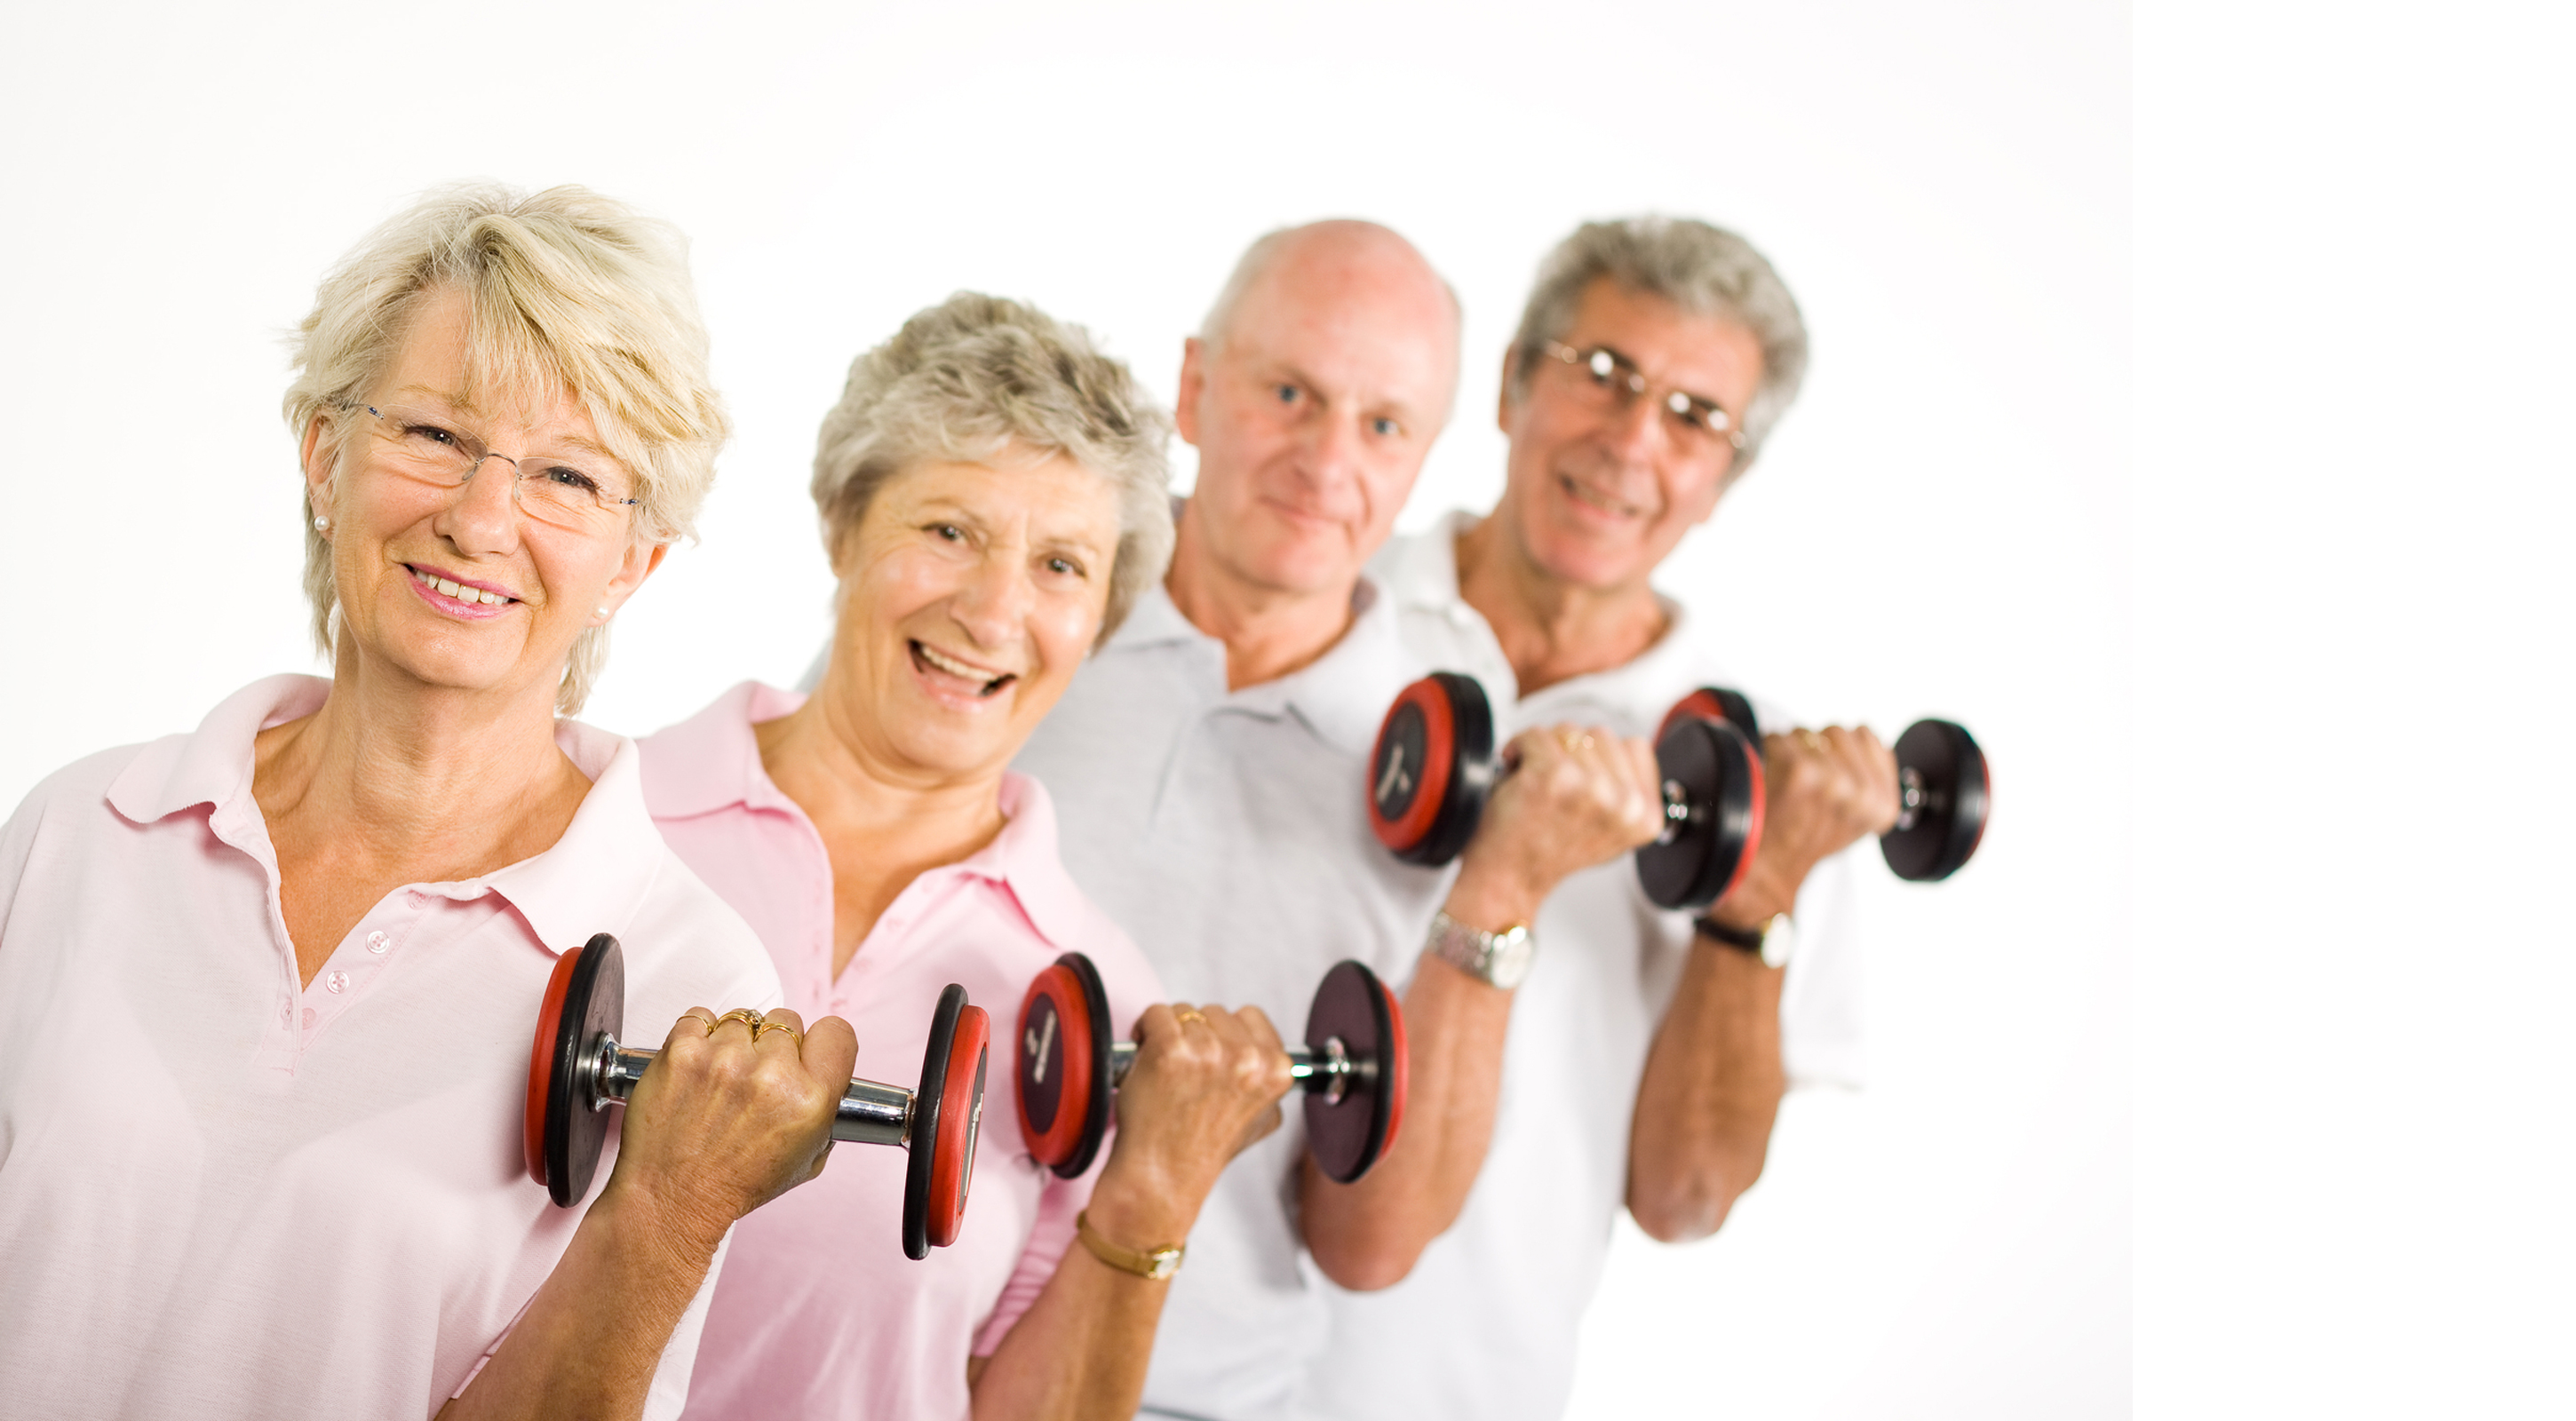 beneficial Severna Park exercise for osteoporosis